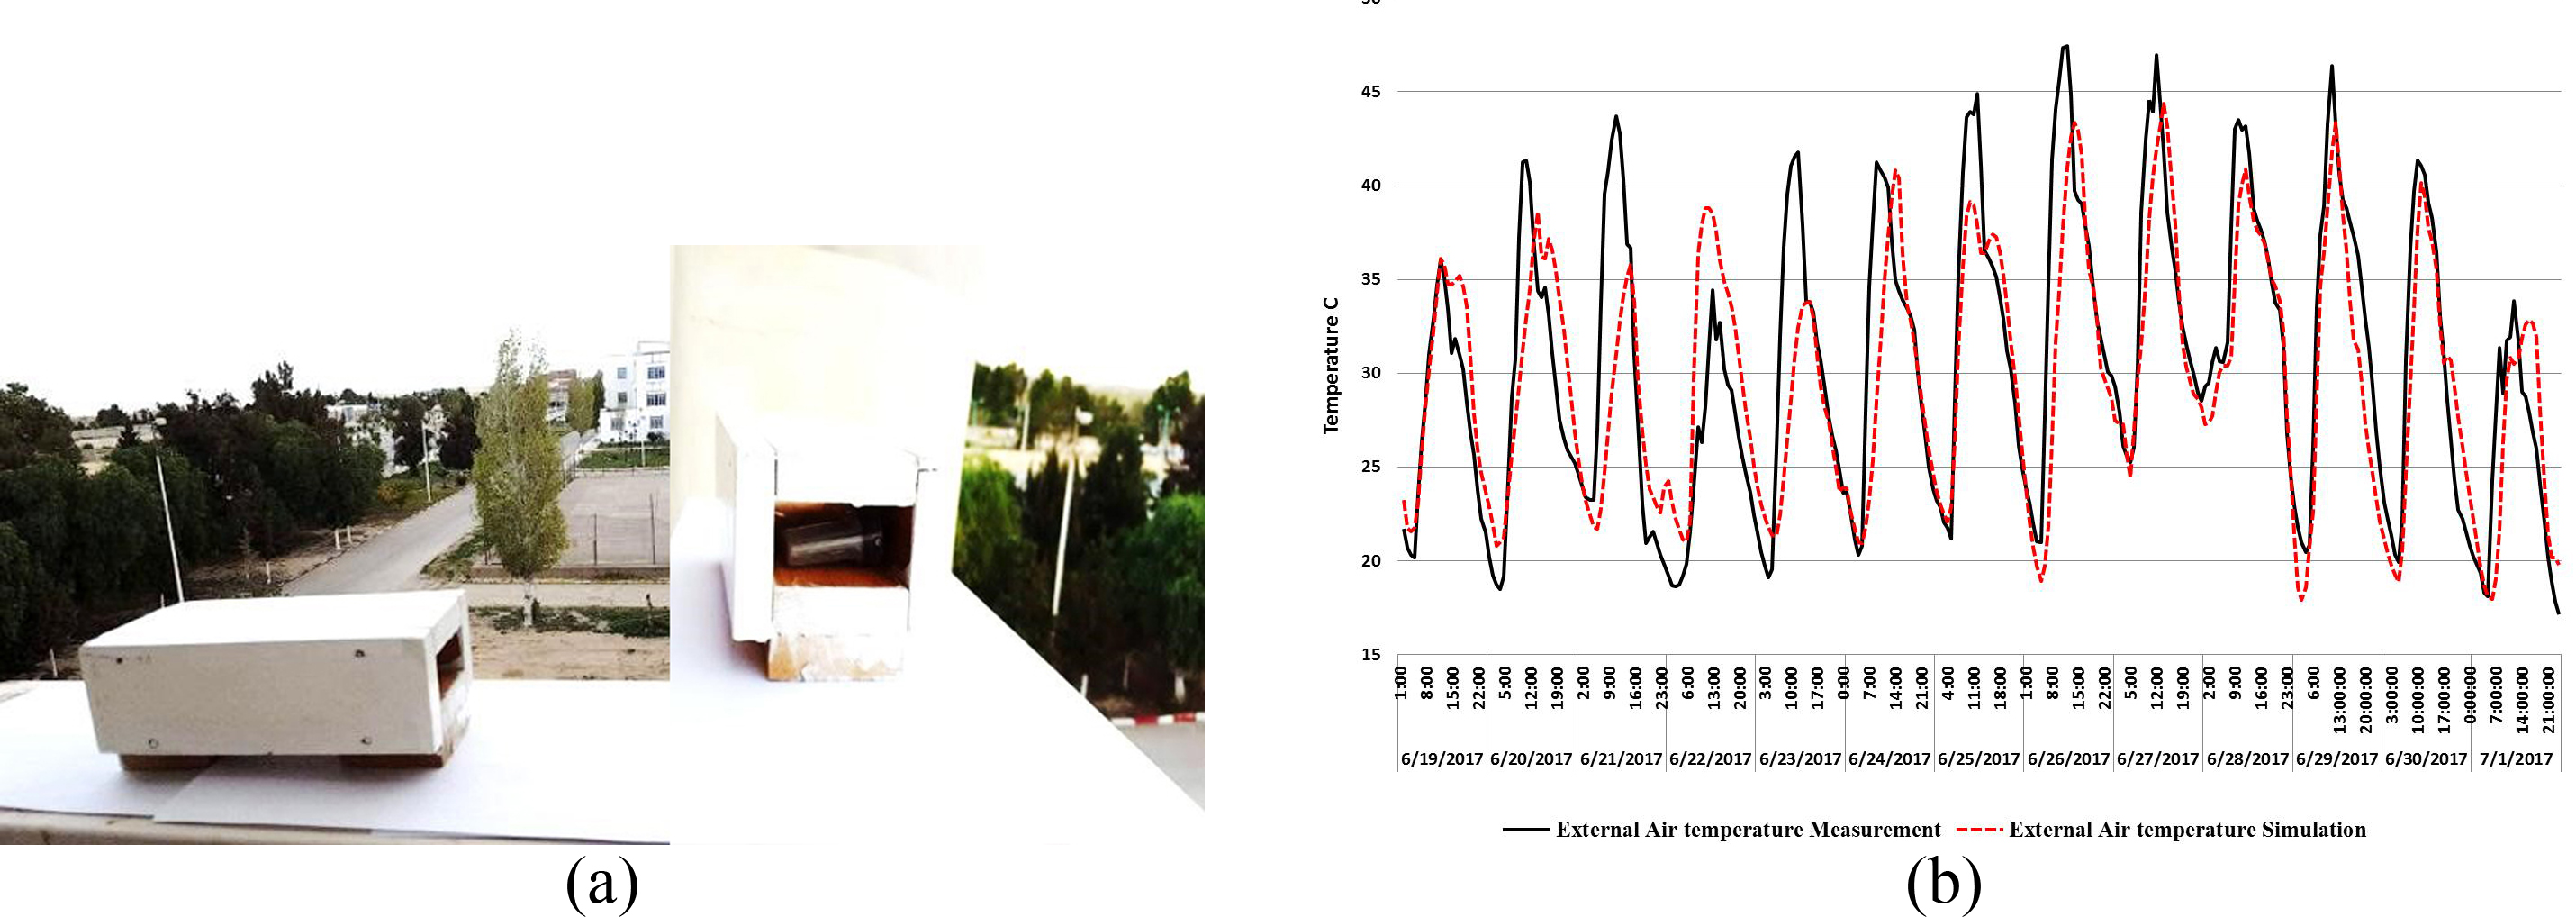 (a) Sheltered wooden box design used to measure external air temperature. (b) Comparison of outdoor temperature in measurement and TMY used in simulation.